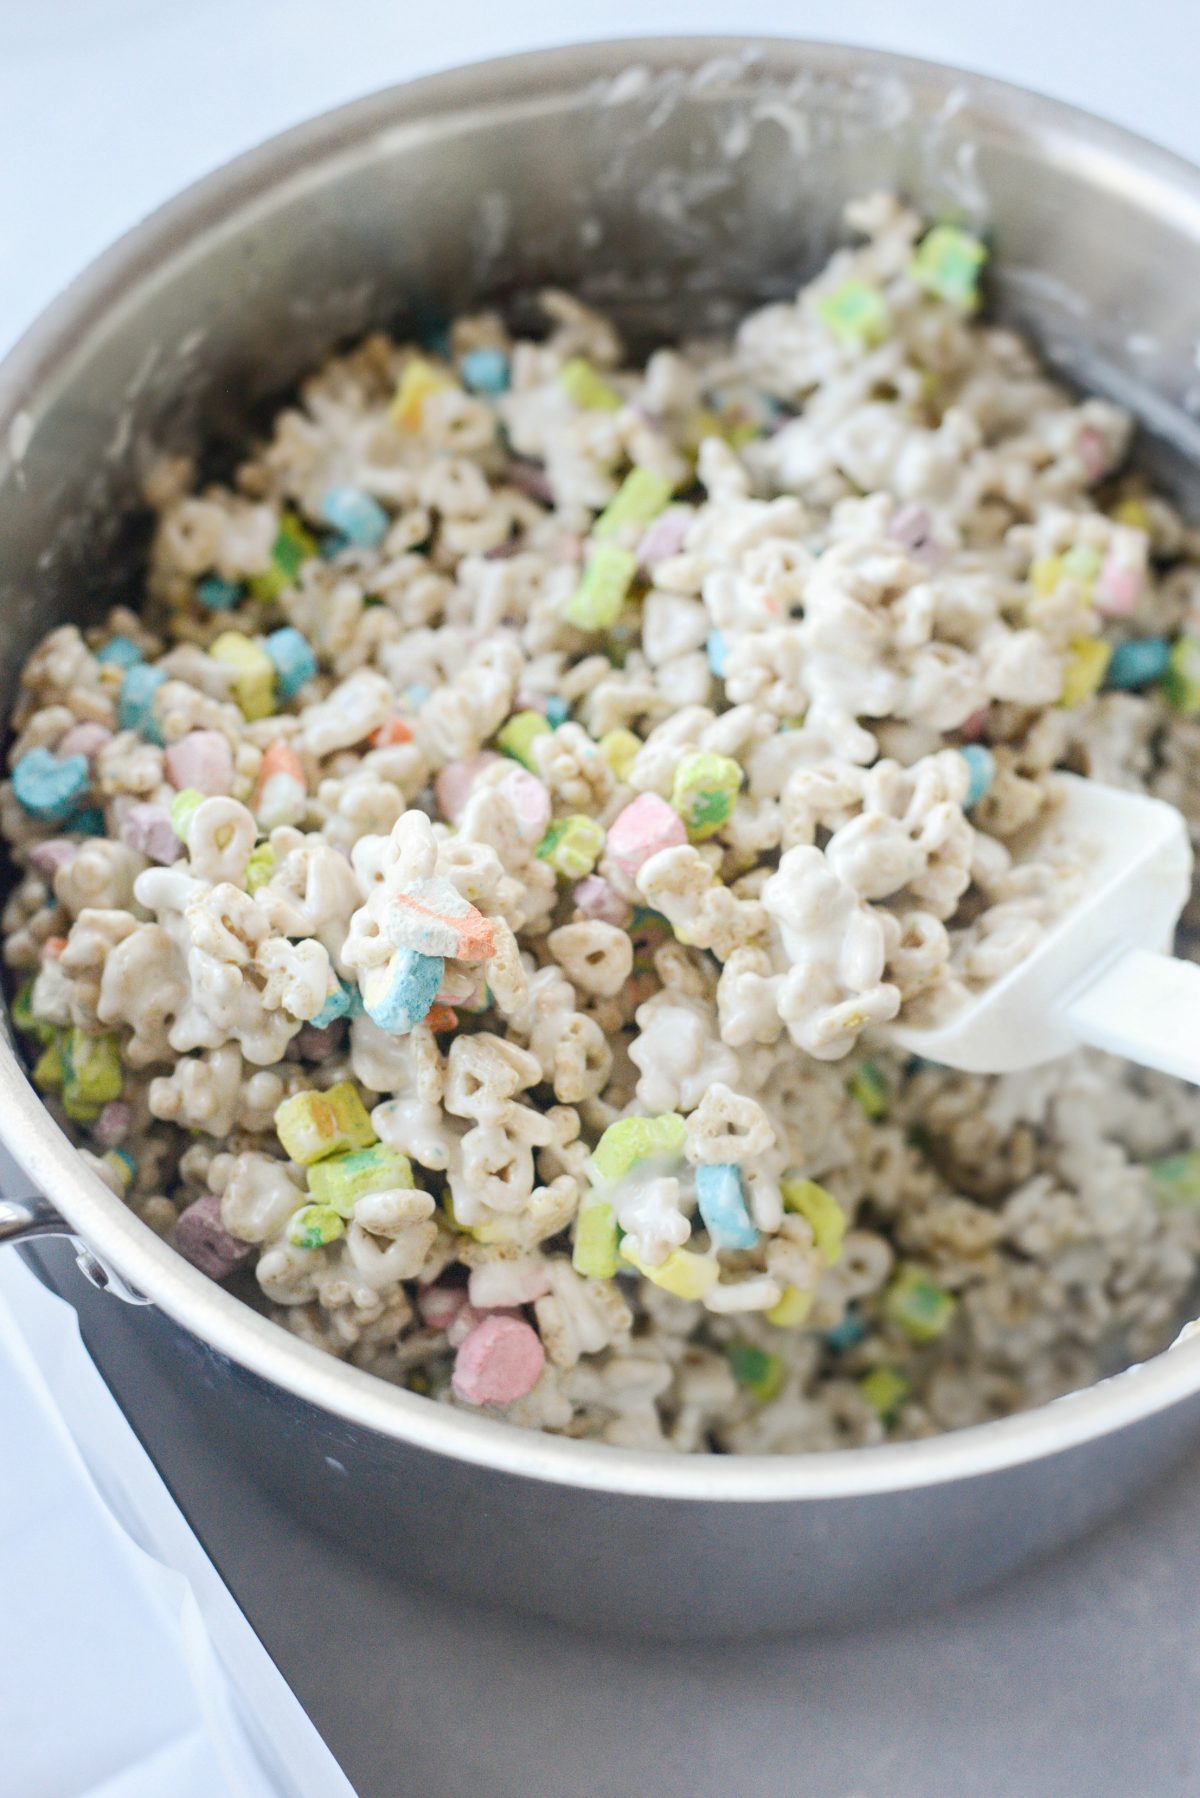 lucky charms marshmallows mixed in with the cereal and marshmallow mixture.